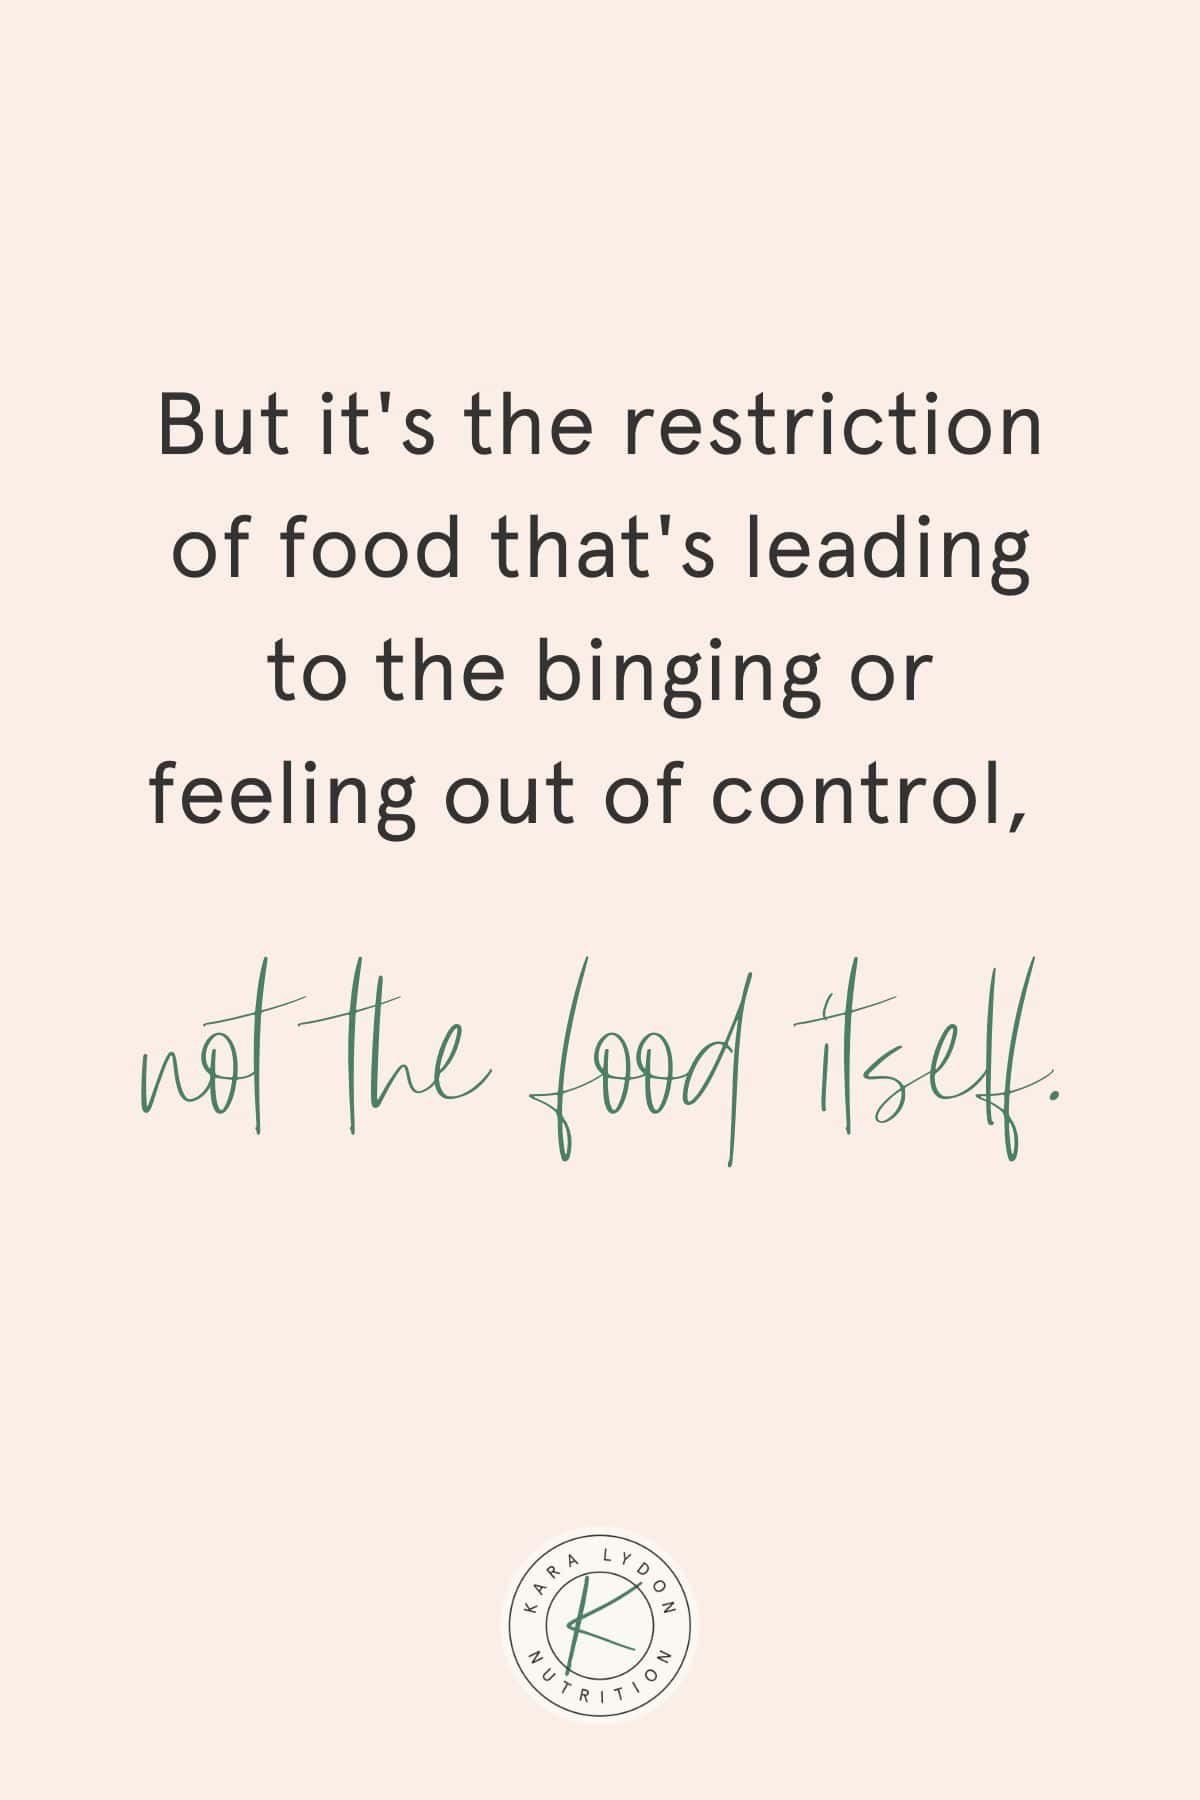 Graphic with quote: "But it's the restriction of food that's leading to the binging or feeling out of control, not the food itself."